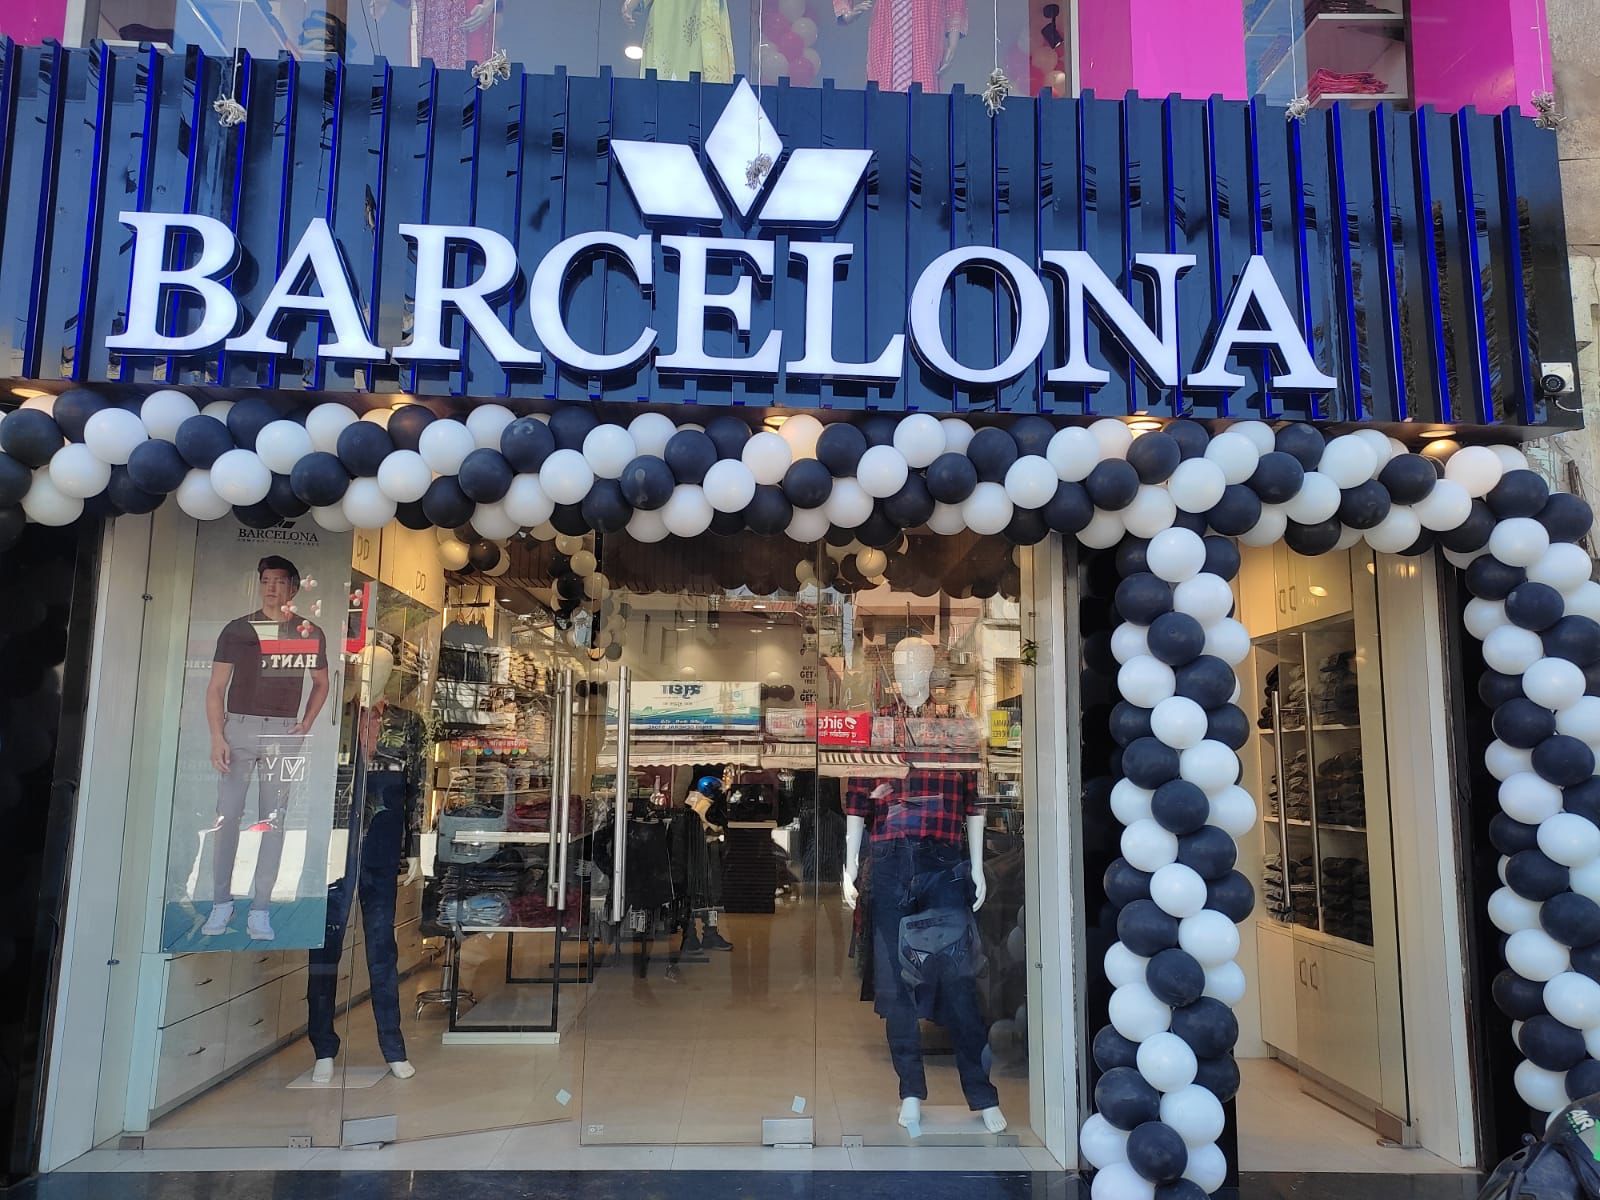 Jack & Jones expands its retail presence in Barcelona with new store